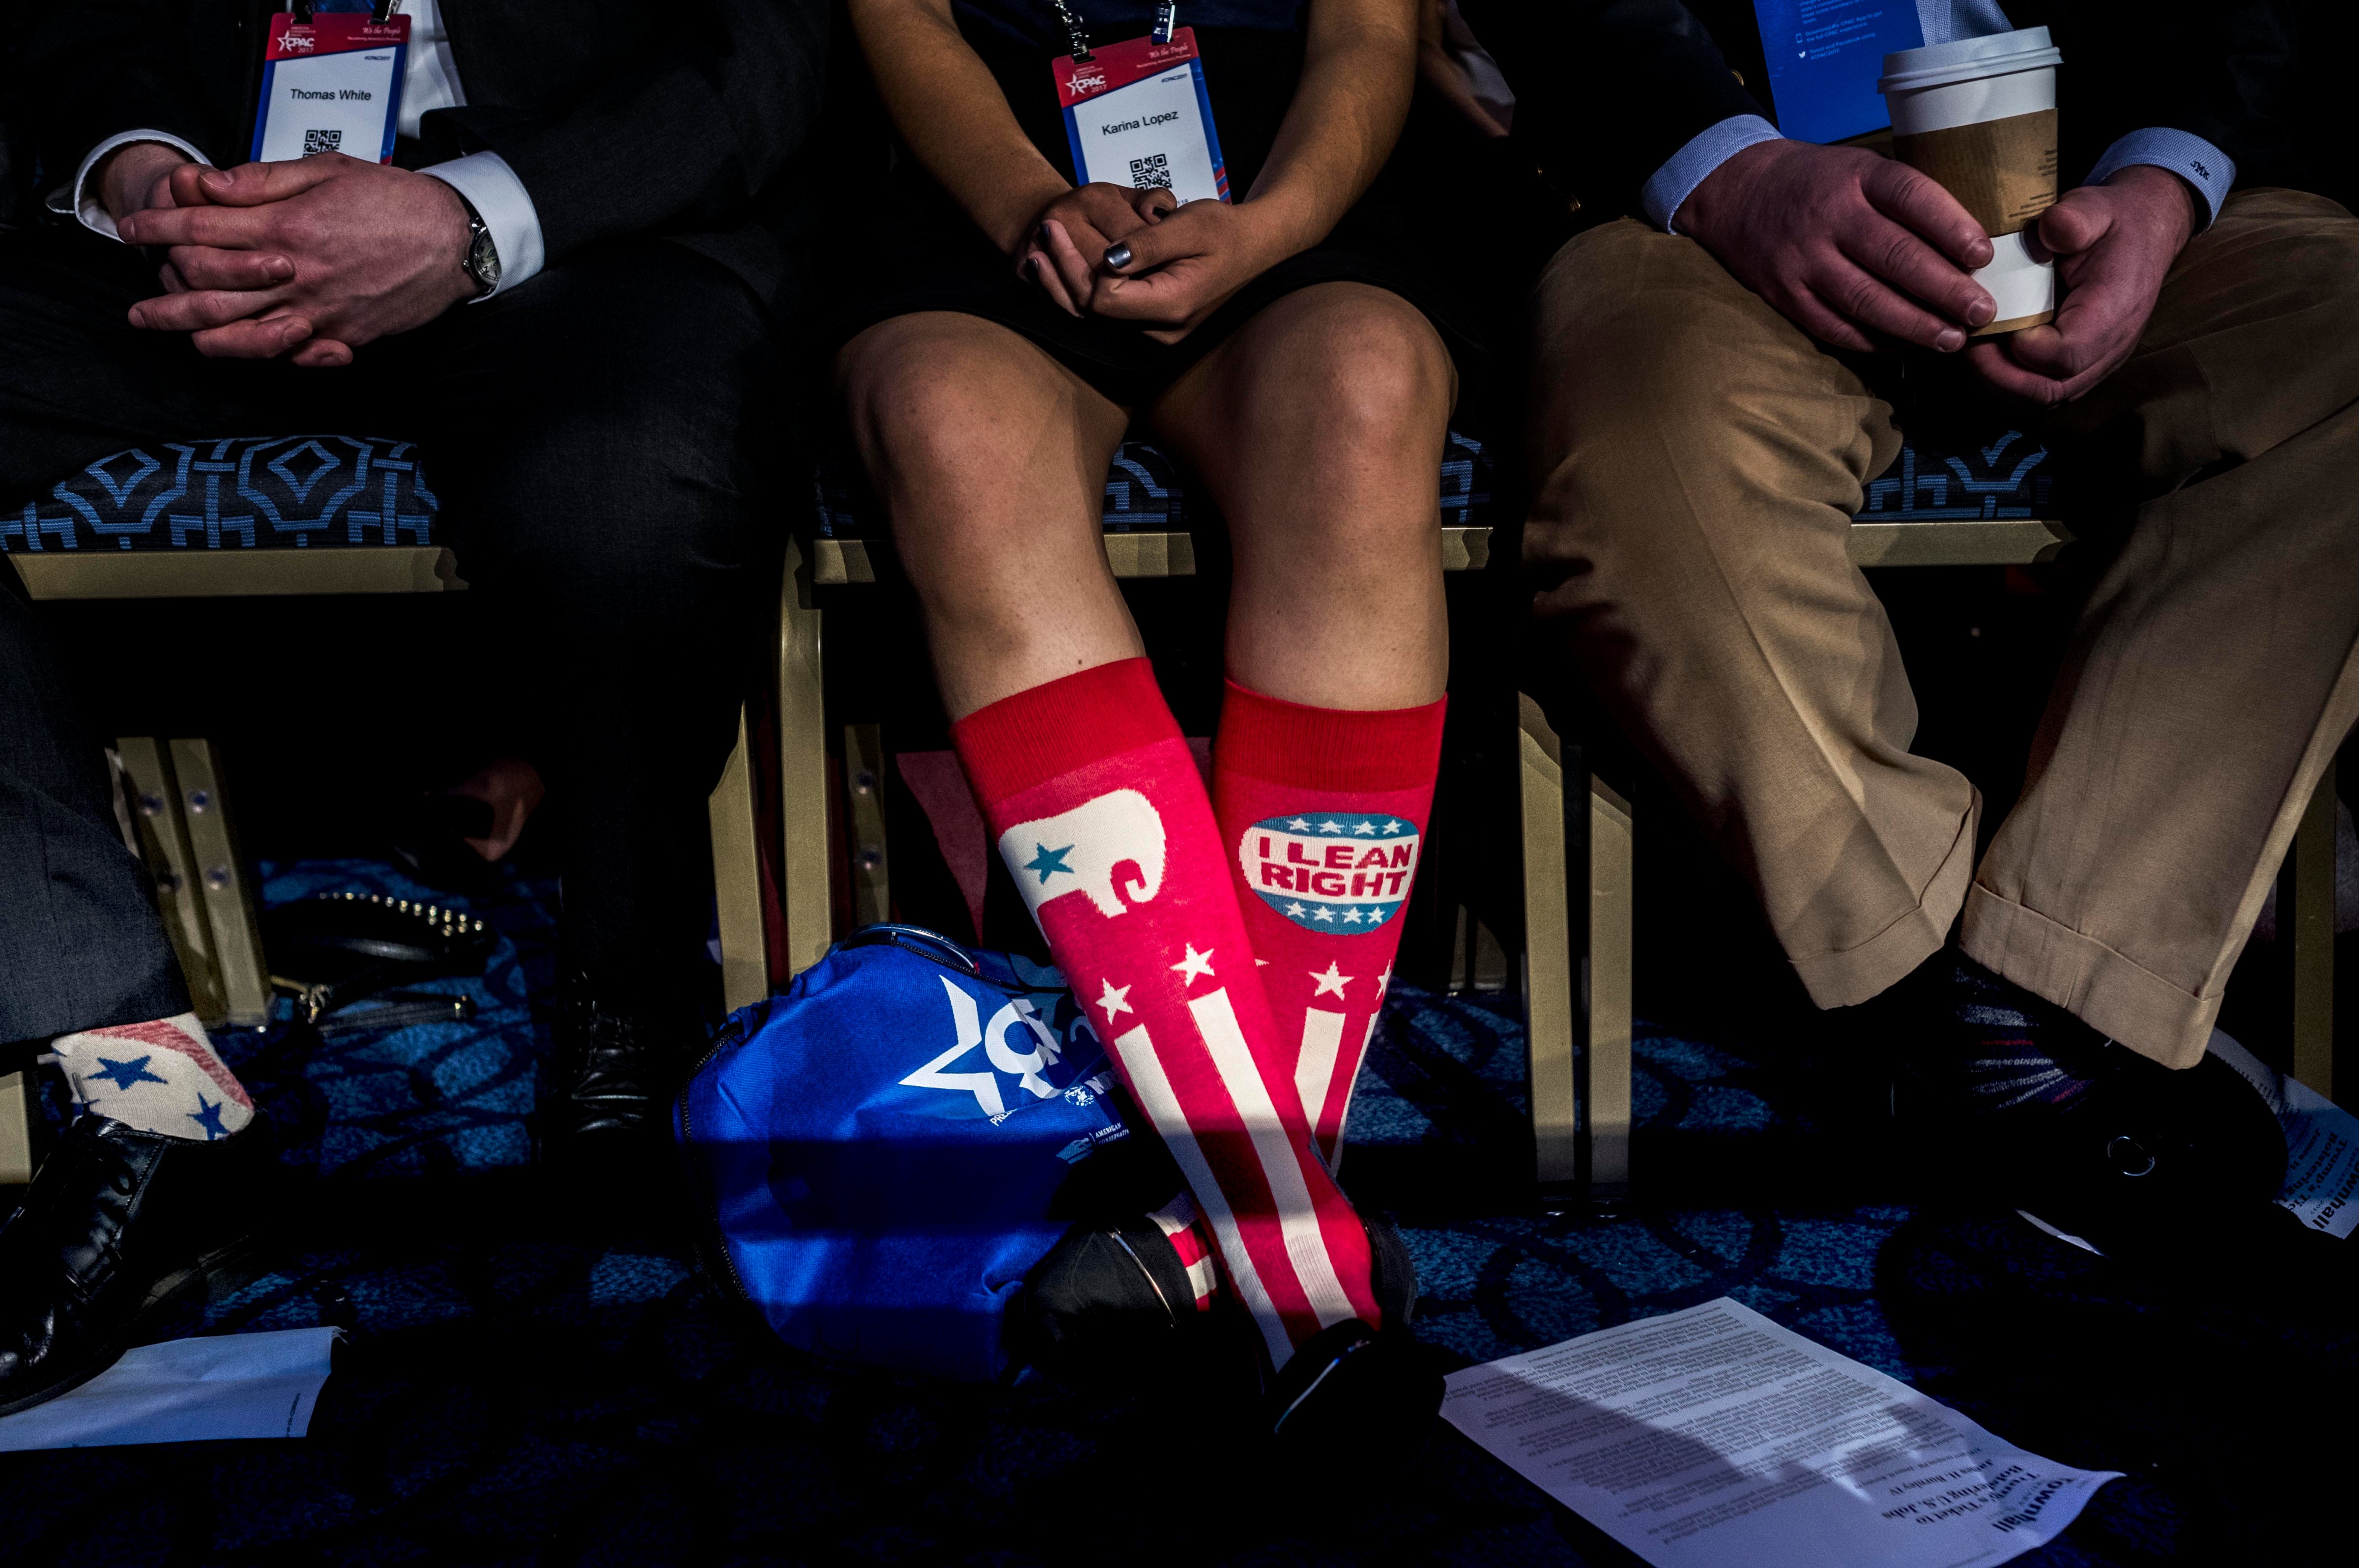 Supporters wait for President Donald Trump to speak to a packed ballroom during the CPAC conference at the Gaylord Hotel and Convention Center in Oxon Hill, Maryland Friday February 24, 2017. (Melina Mara/The Washington Post via Getty Images)